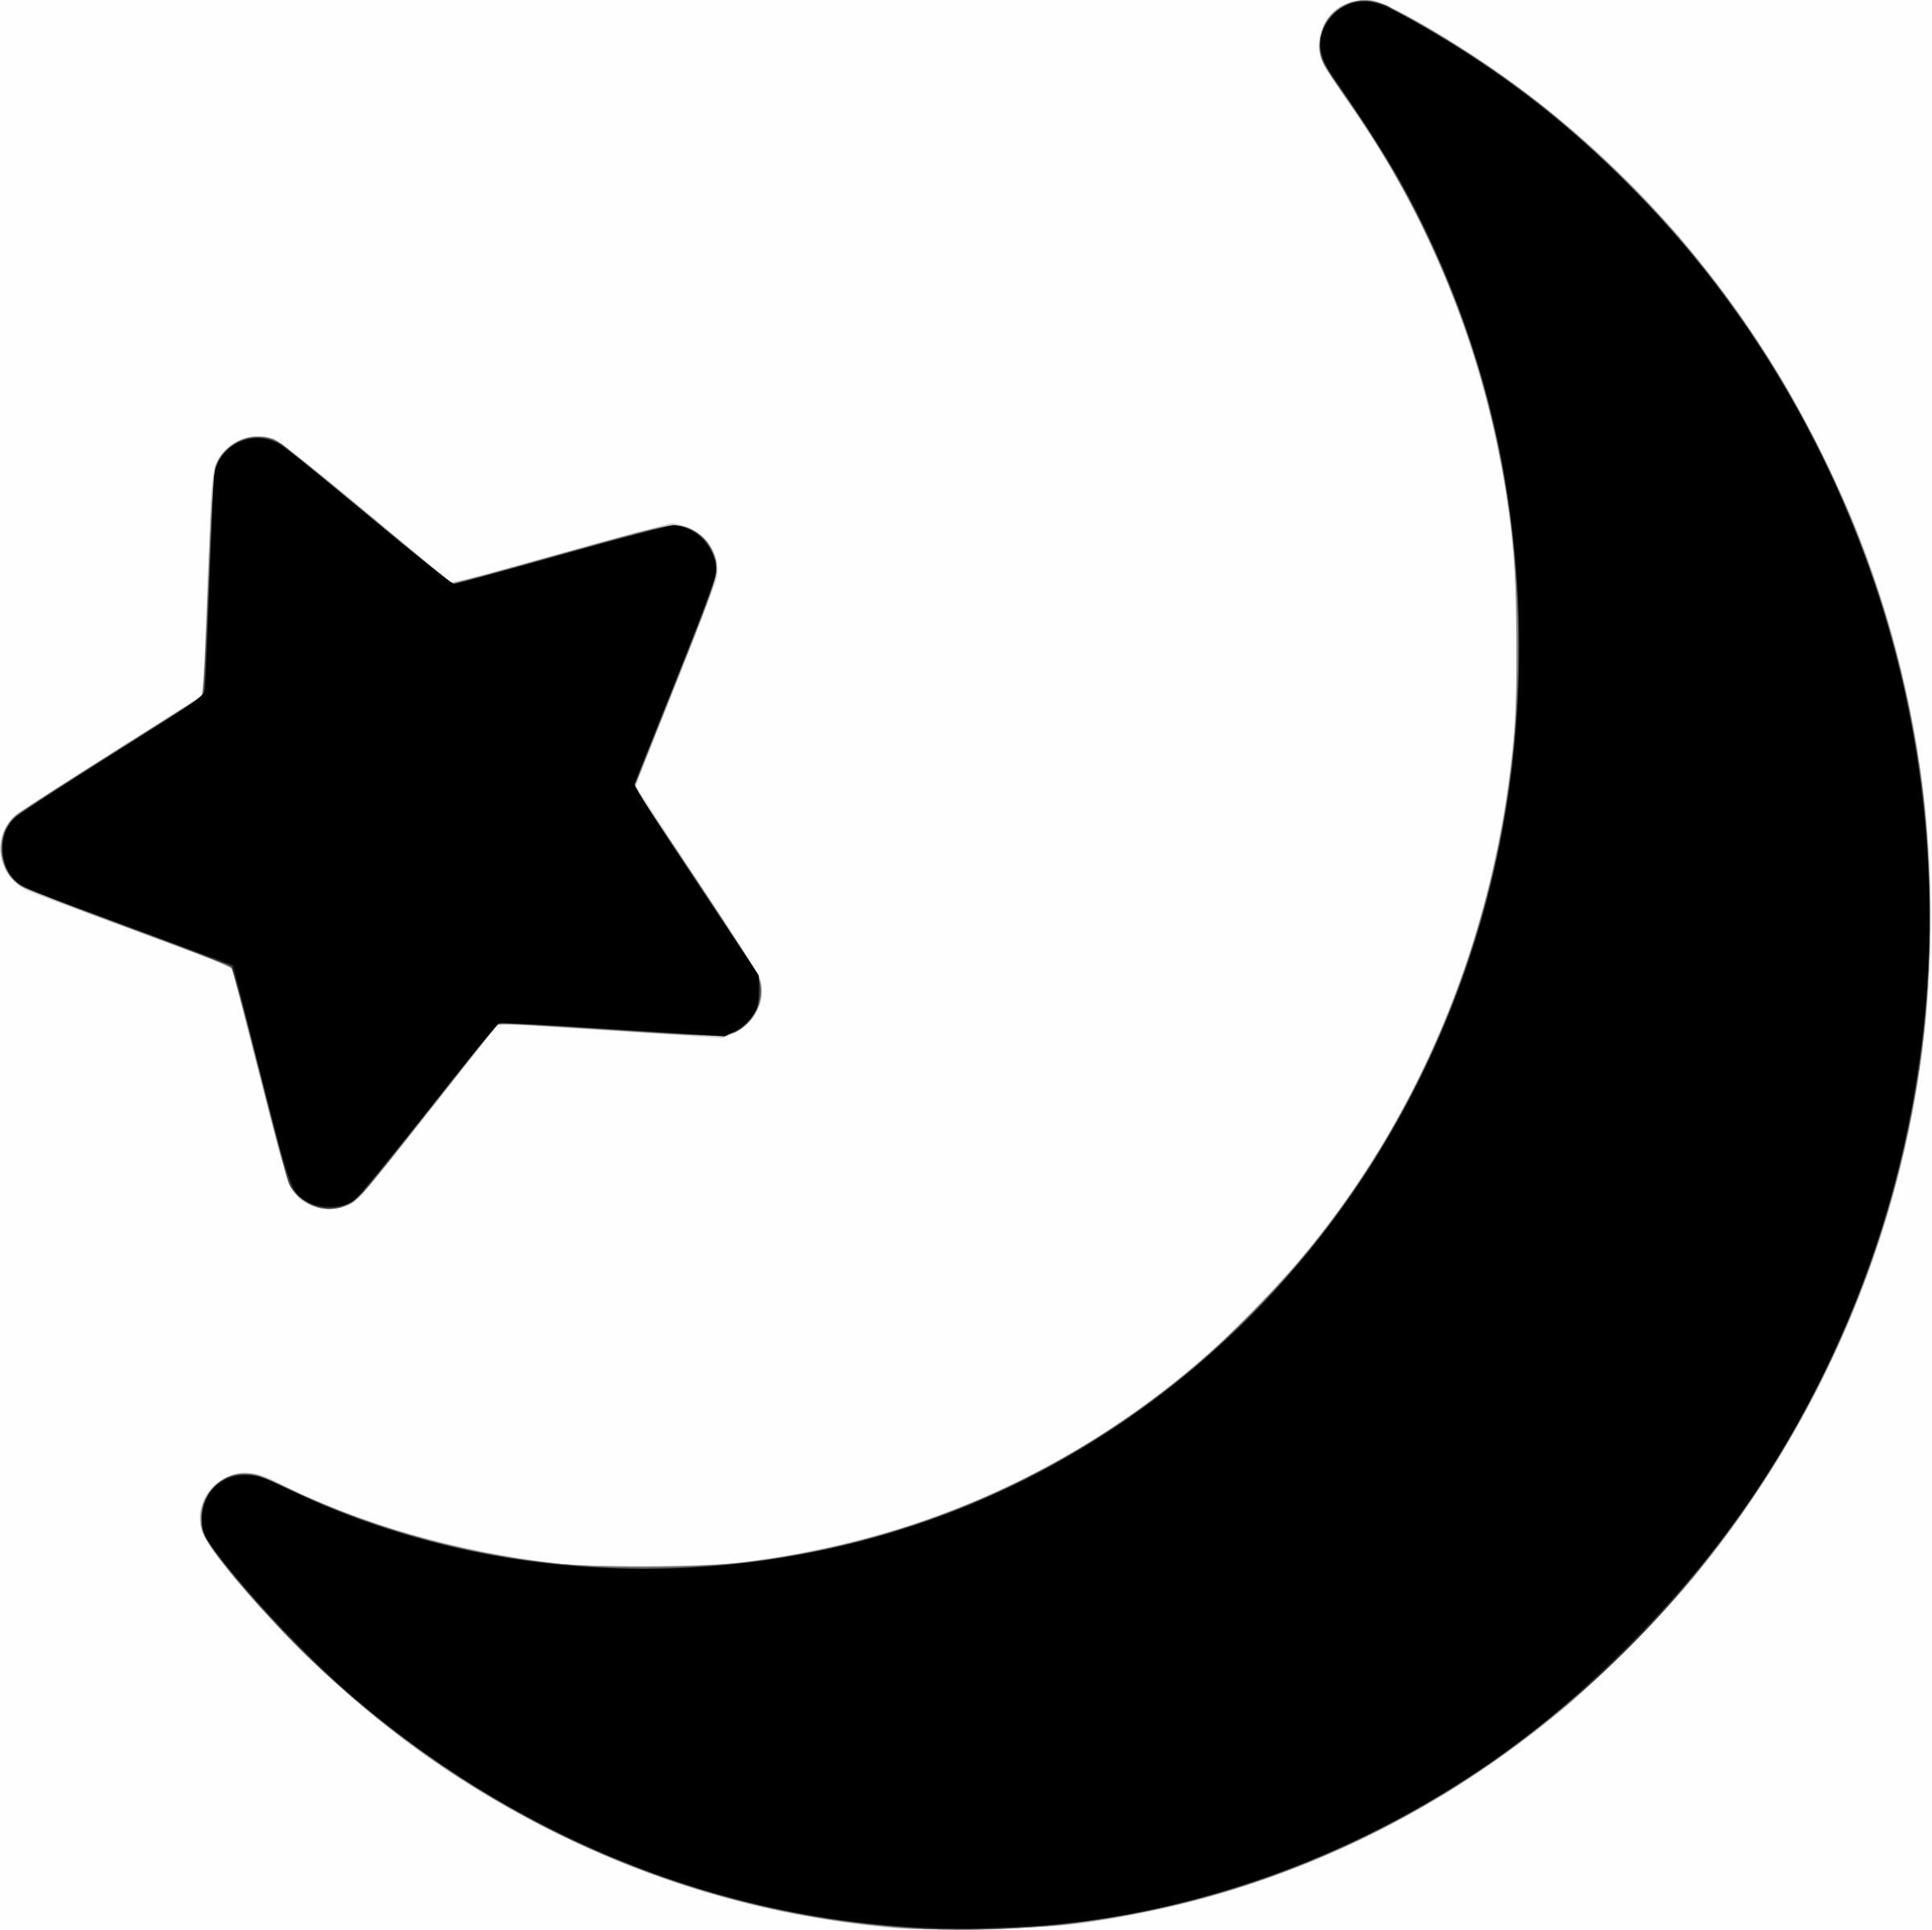 Free Moon Clipart Black And White, Download Free Moon Clipart Black And